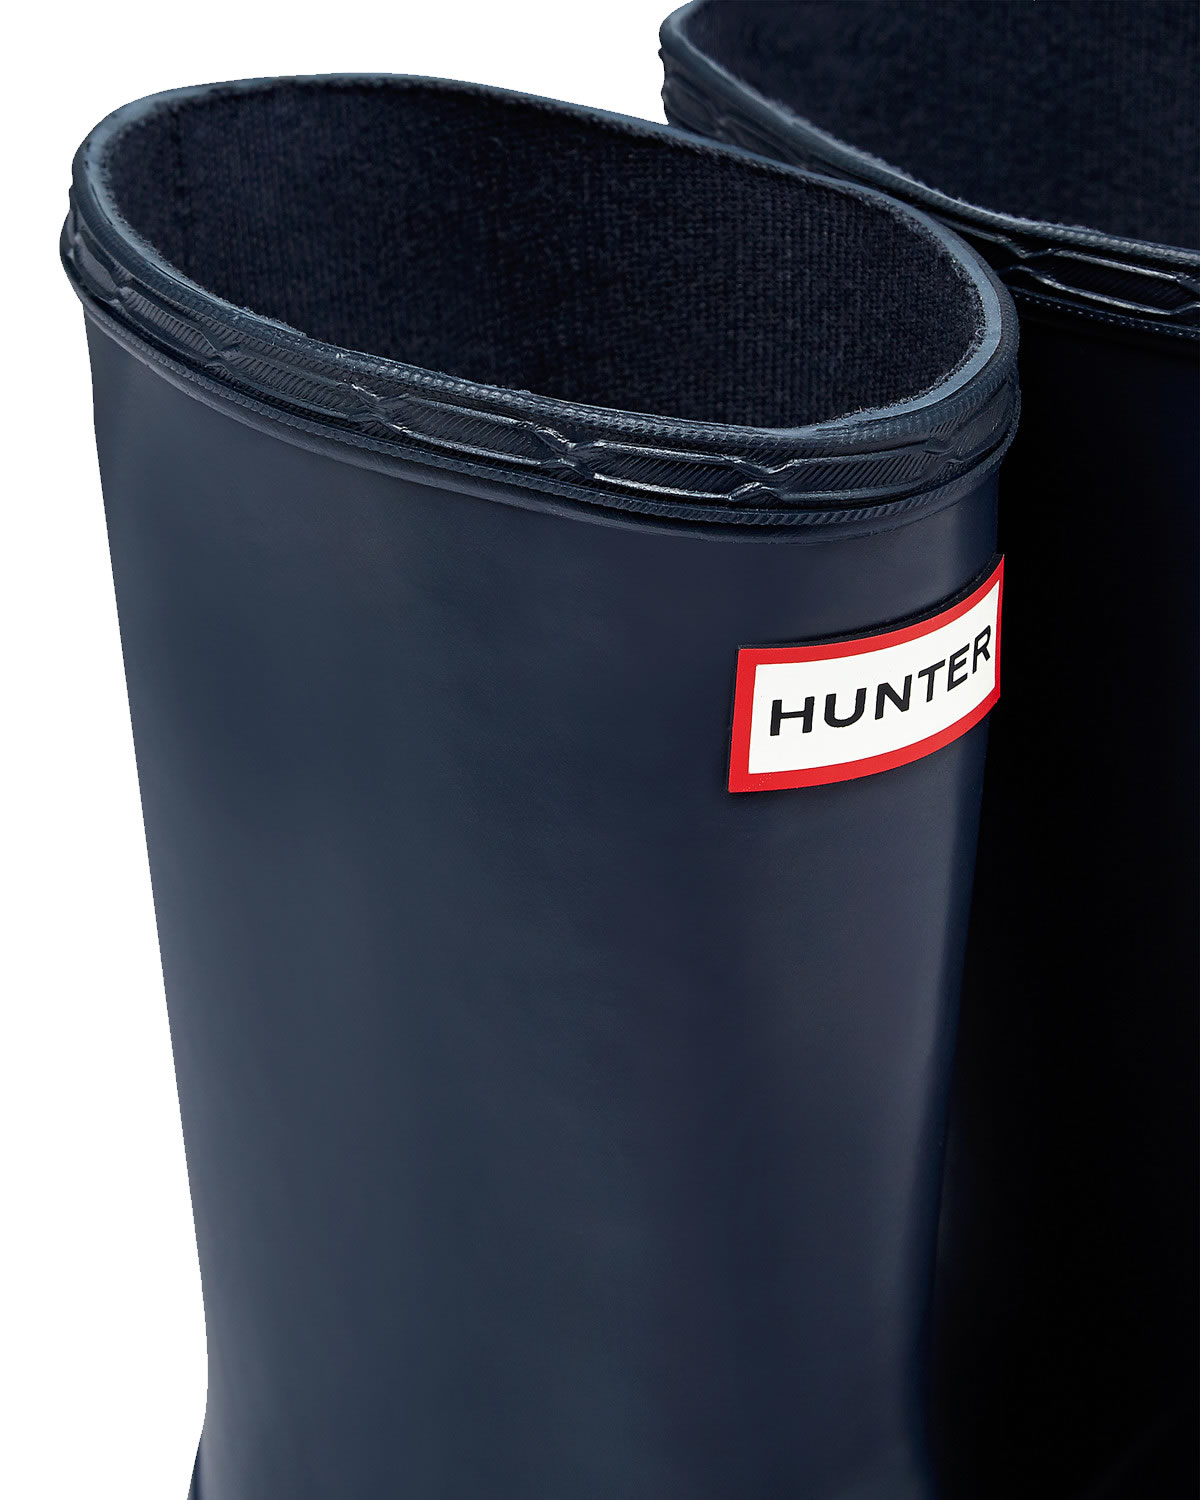 Extra image of Kids First Hunter Wellies - Navy UK 6 INF (EURO 23)